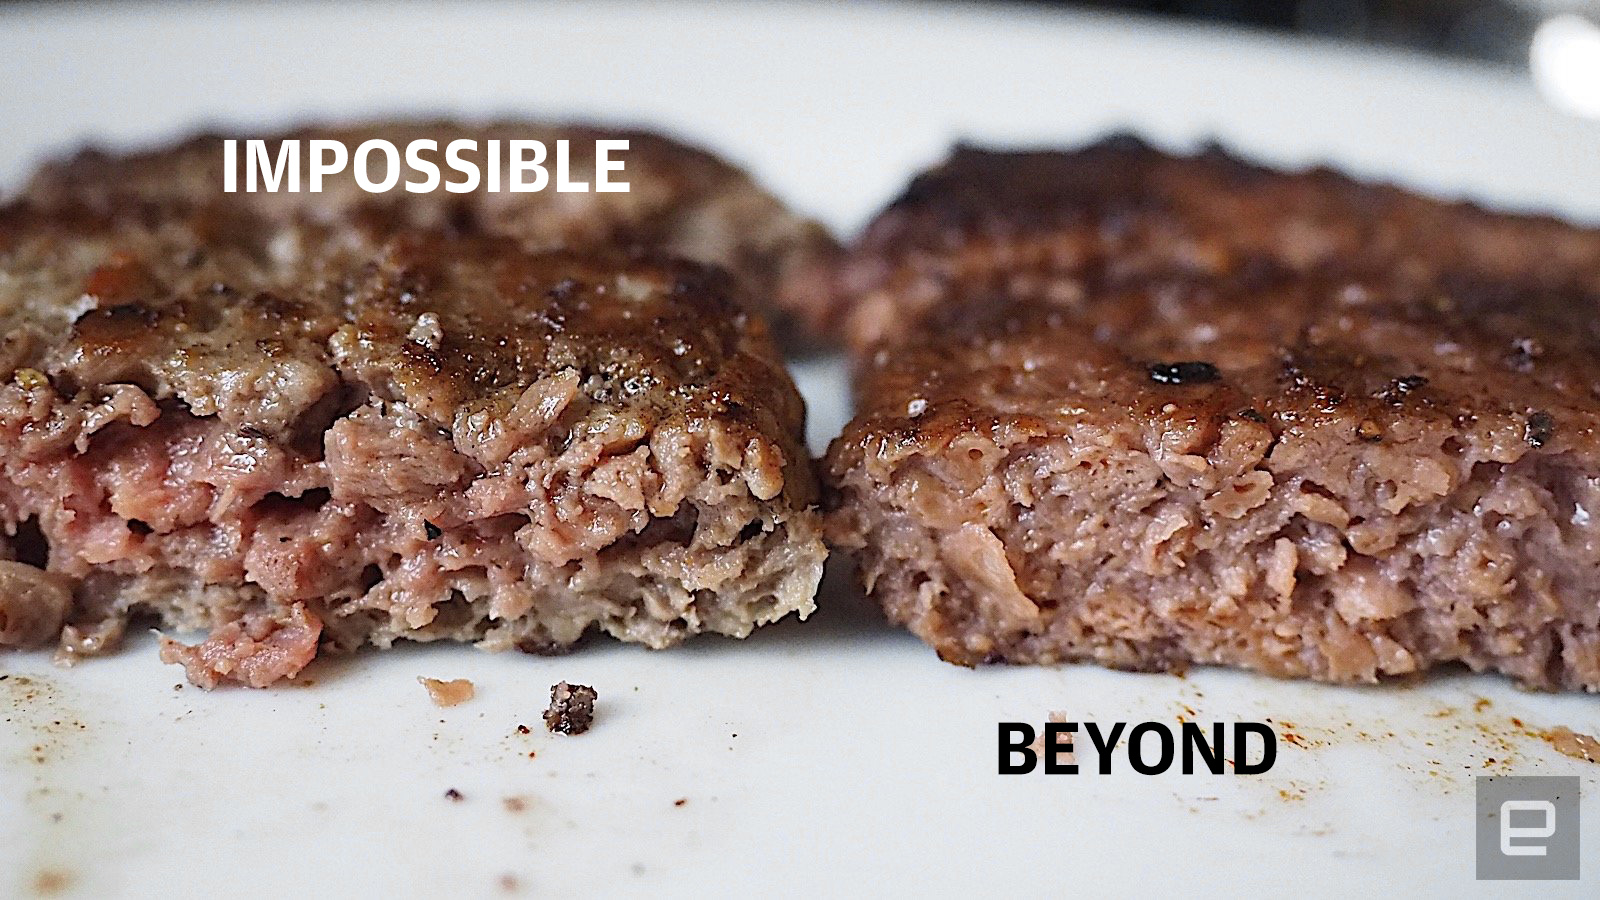 Impossible vs. Beyond